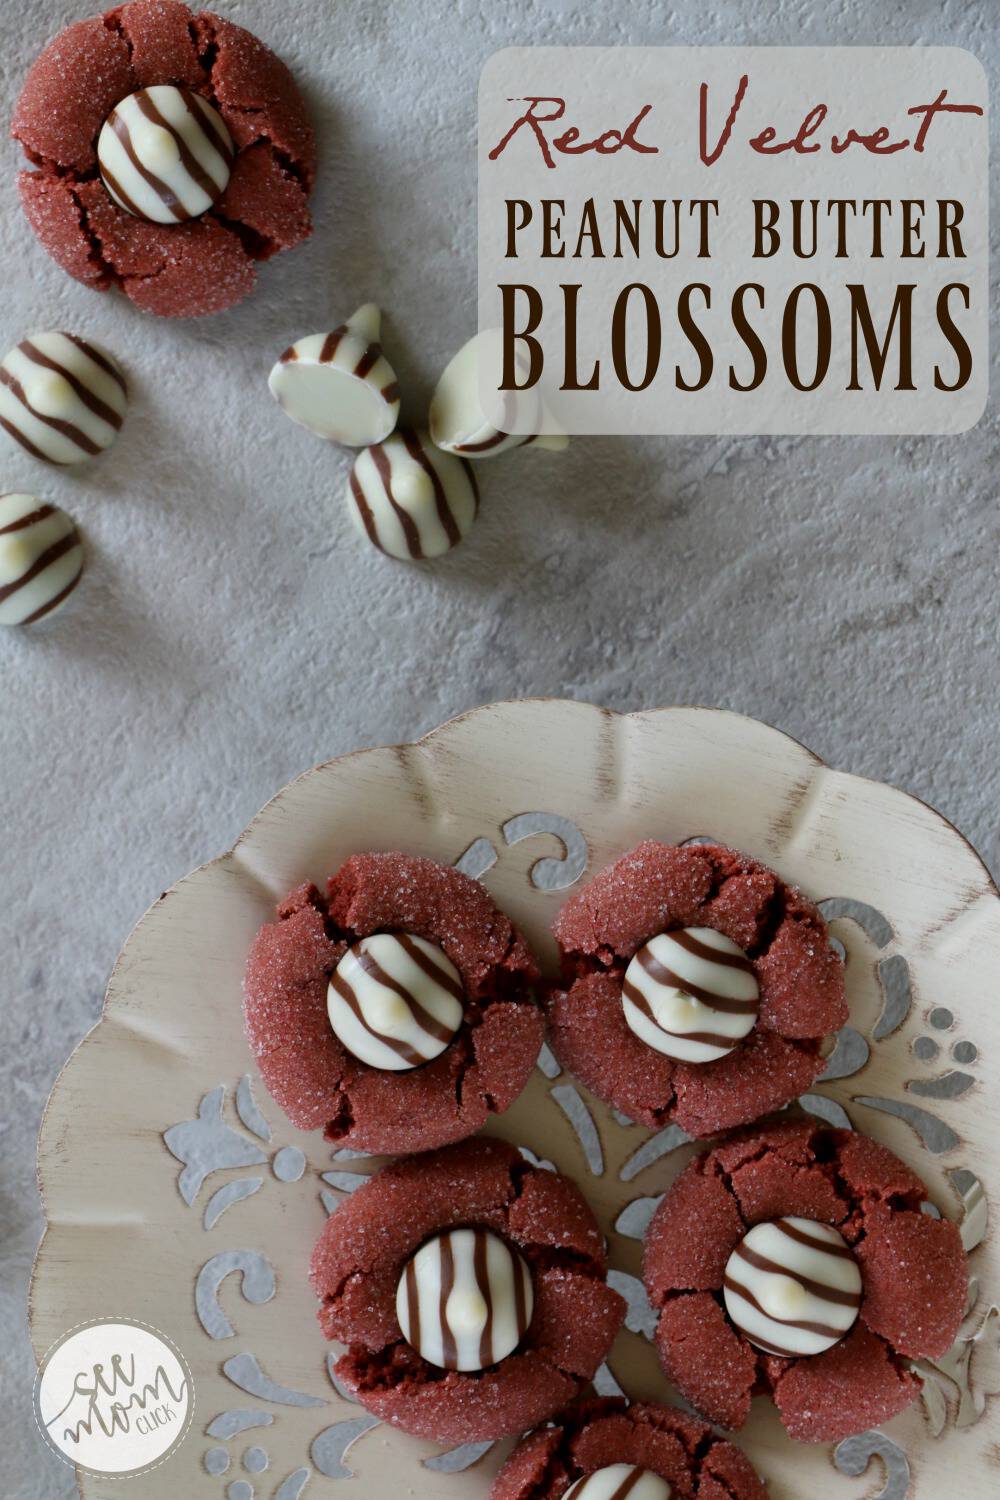 Here's a fun twist in a classic! These Red Velvet Peanut Butter Blossoms Recipe are perfect for a Valentine's Day dessert or class party treat.